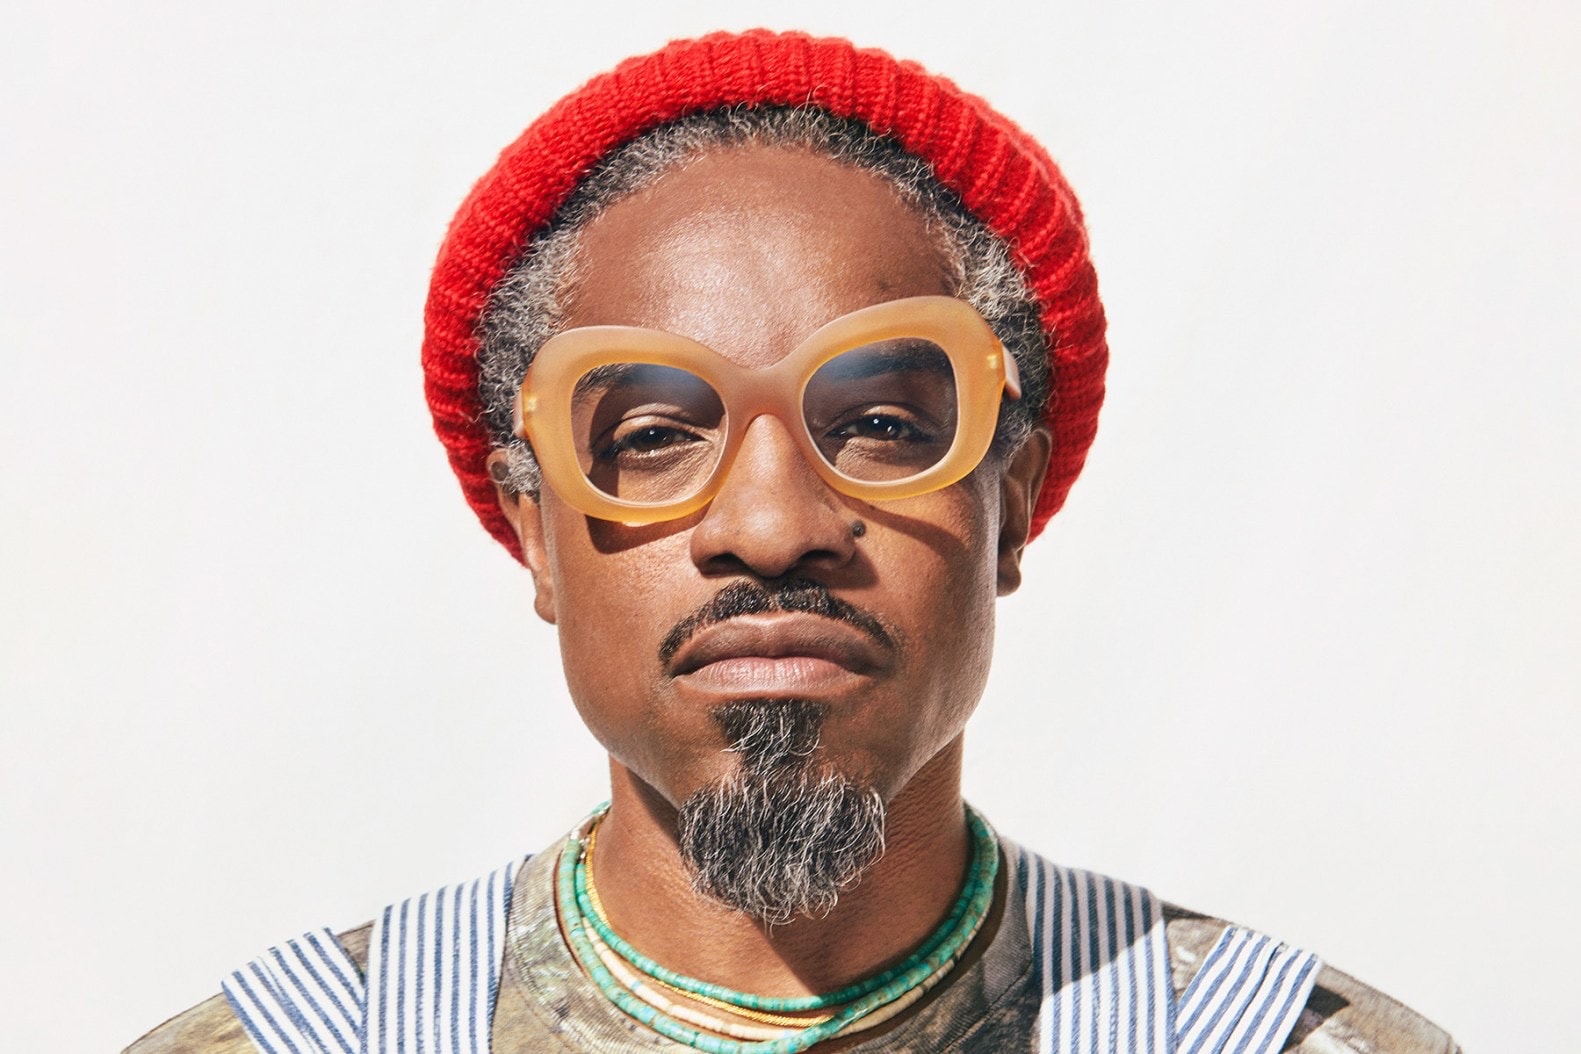 Why Did Andre 3000 Leave The Music Industry